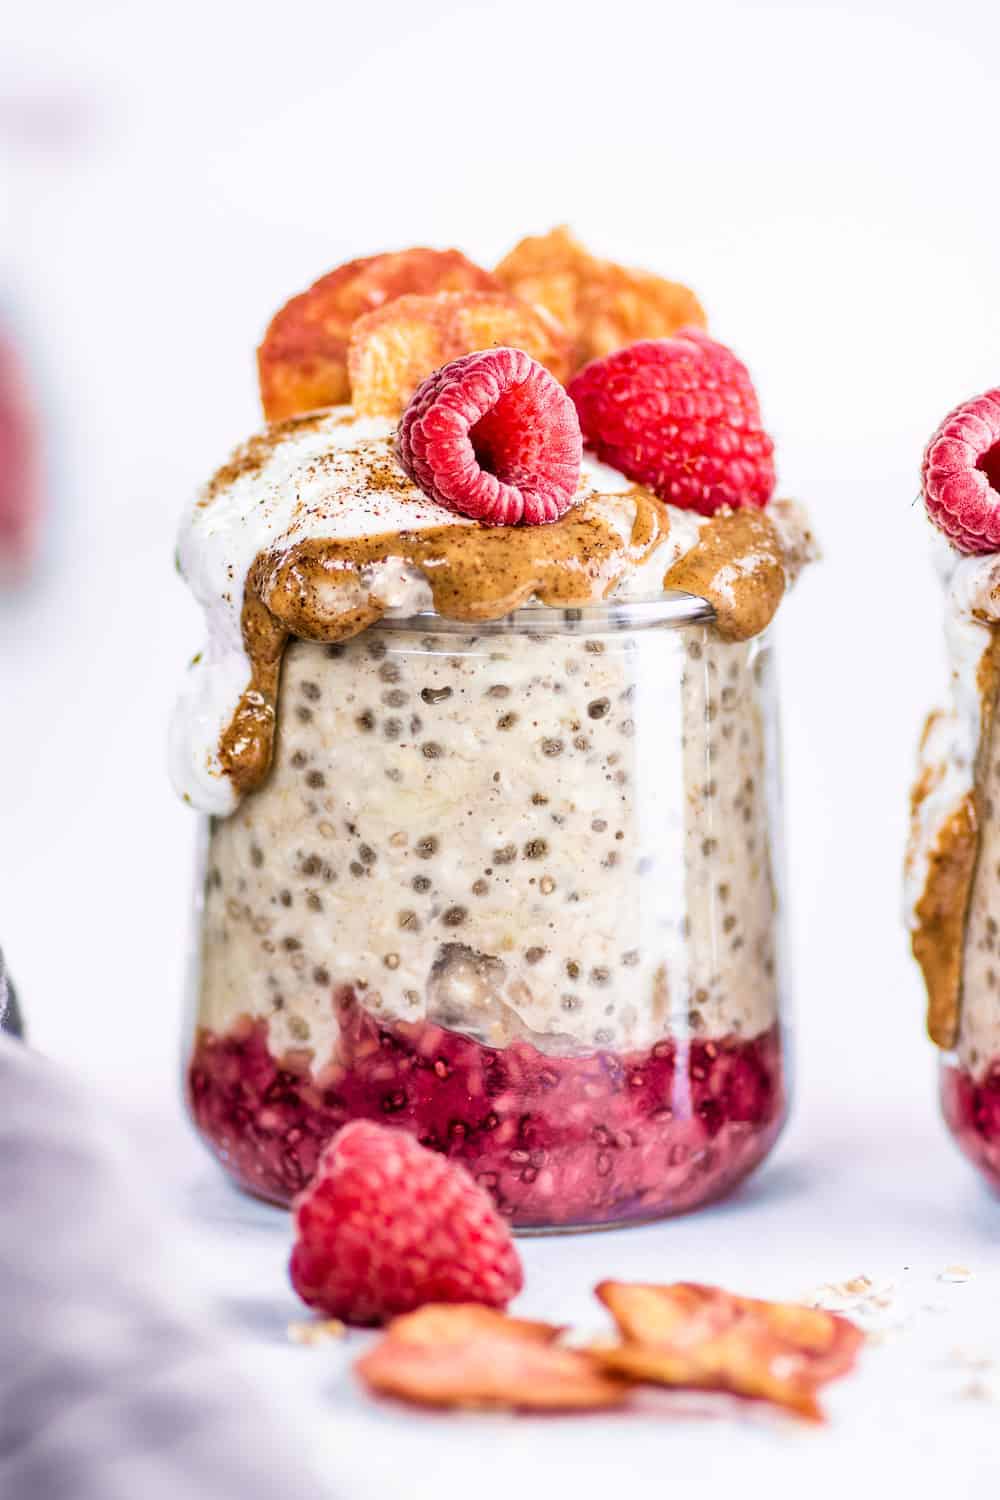 Easy Banana Overnight Oats With Chia Seeds Vegan Gluten Free The Butter Half